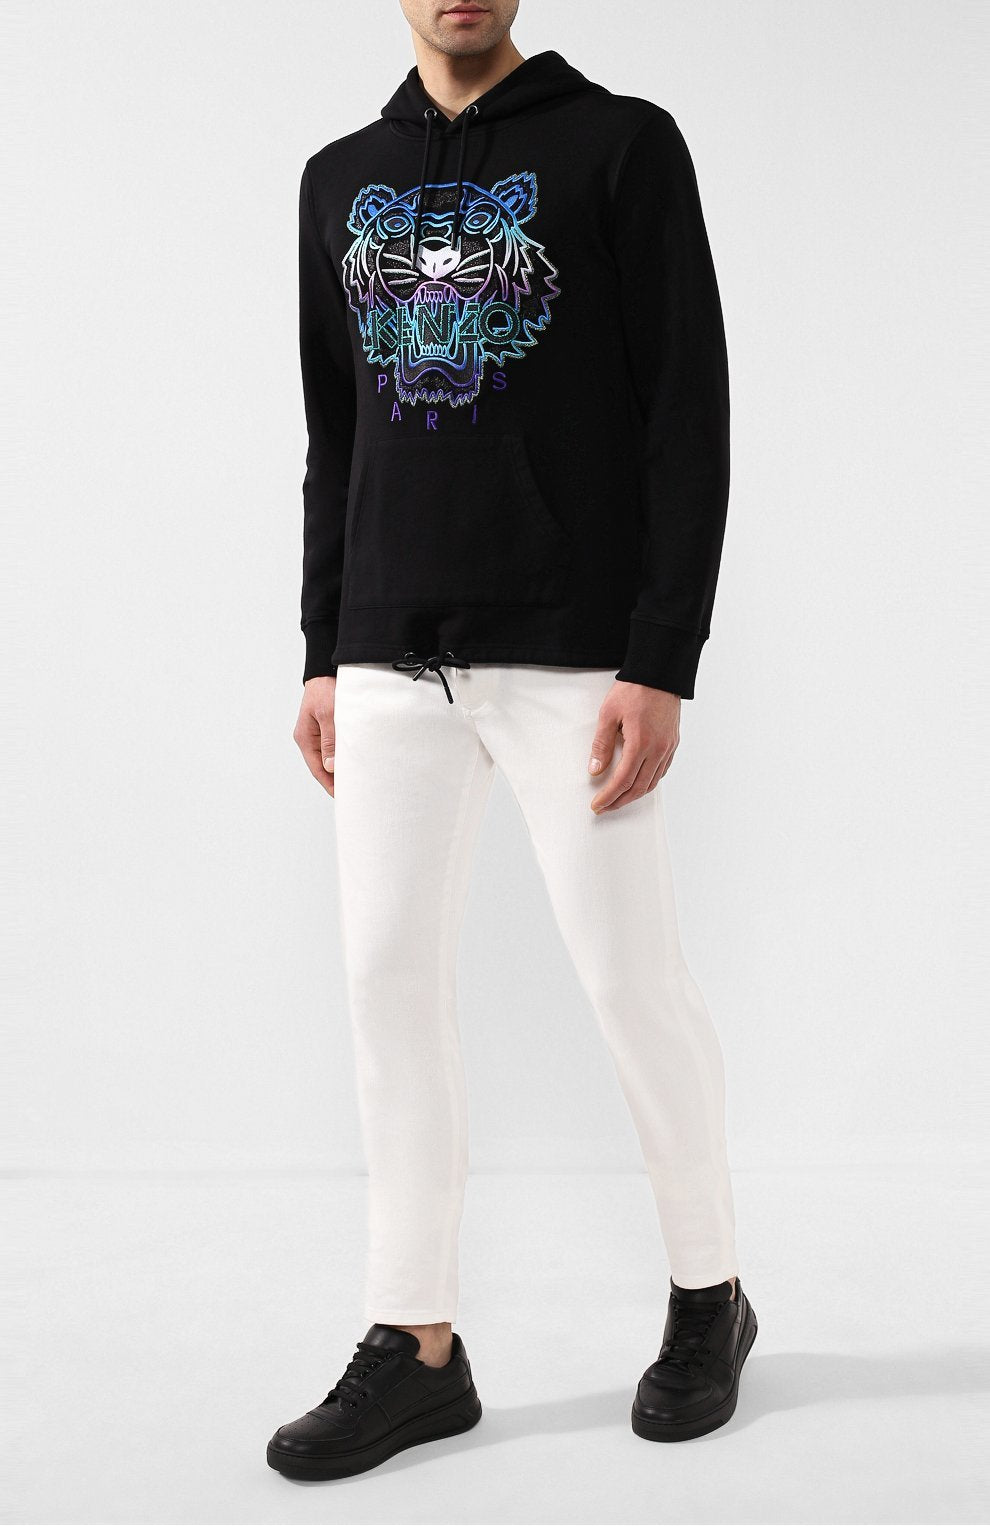 Kenzo Holiday Capsule Tiger Hoodie (Limited Edition) - Shop Streetwear, Sneakers, Slippers and Gifts online | Malaysia - The Factory KL